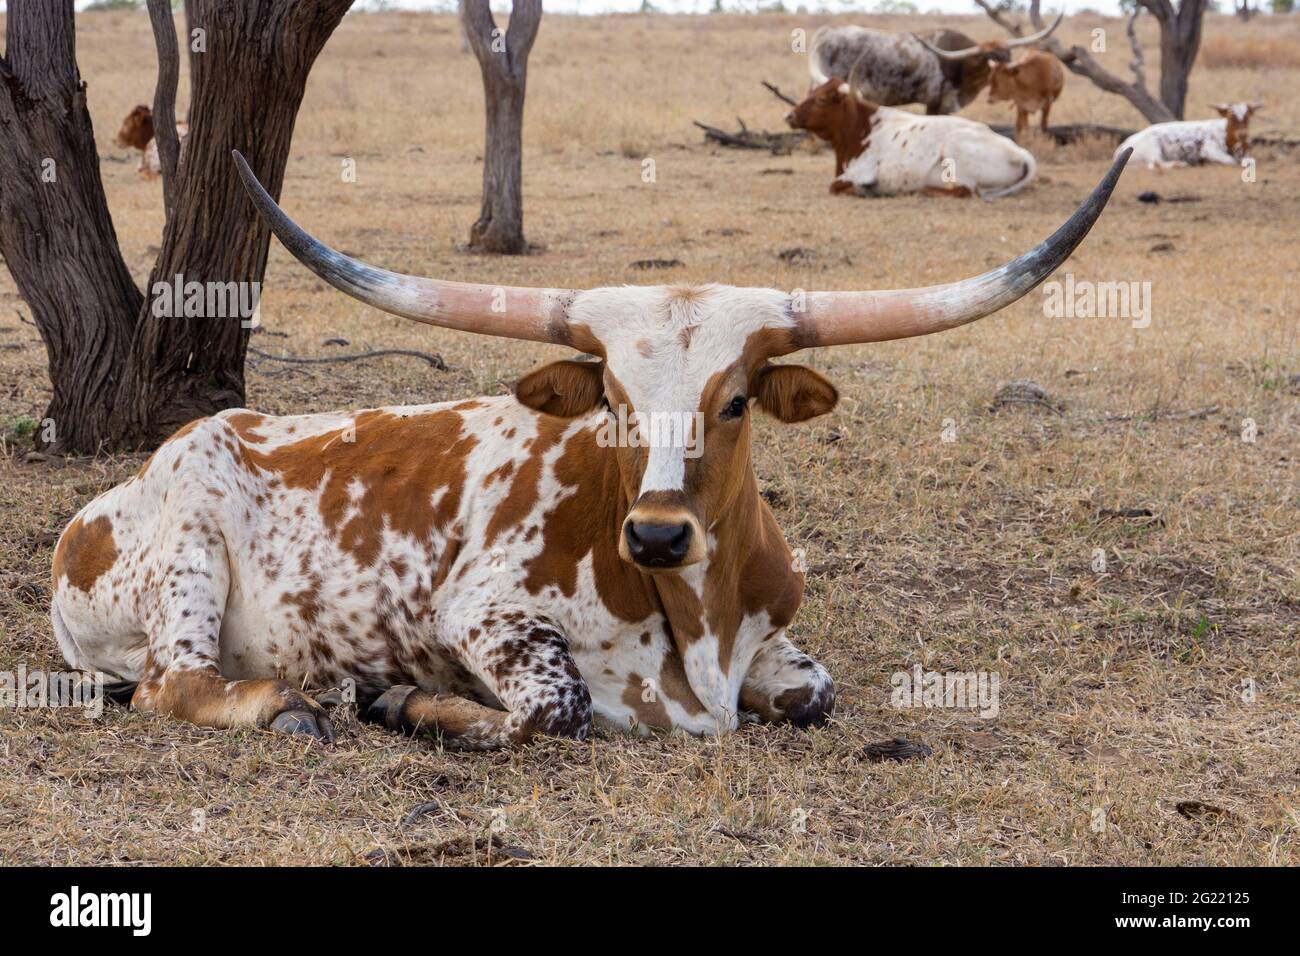 Texas longhorn cattle with enormous horns resting in the shade of trees in a dry paddock. Stock Photo